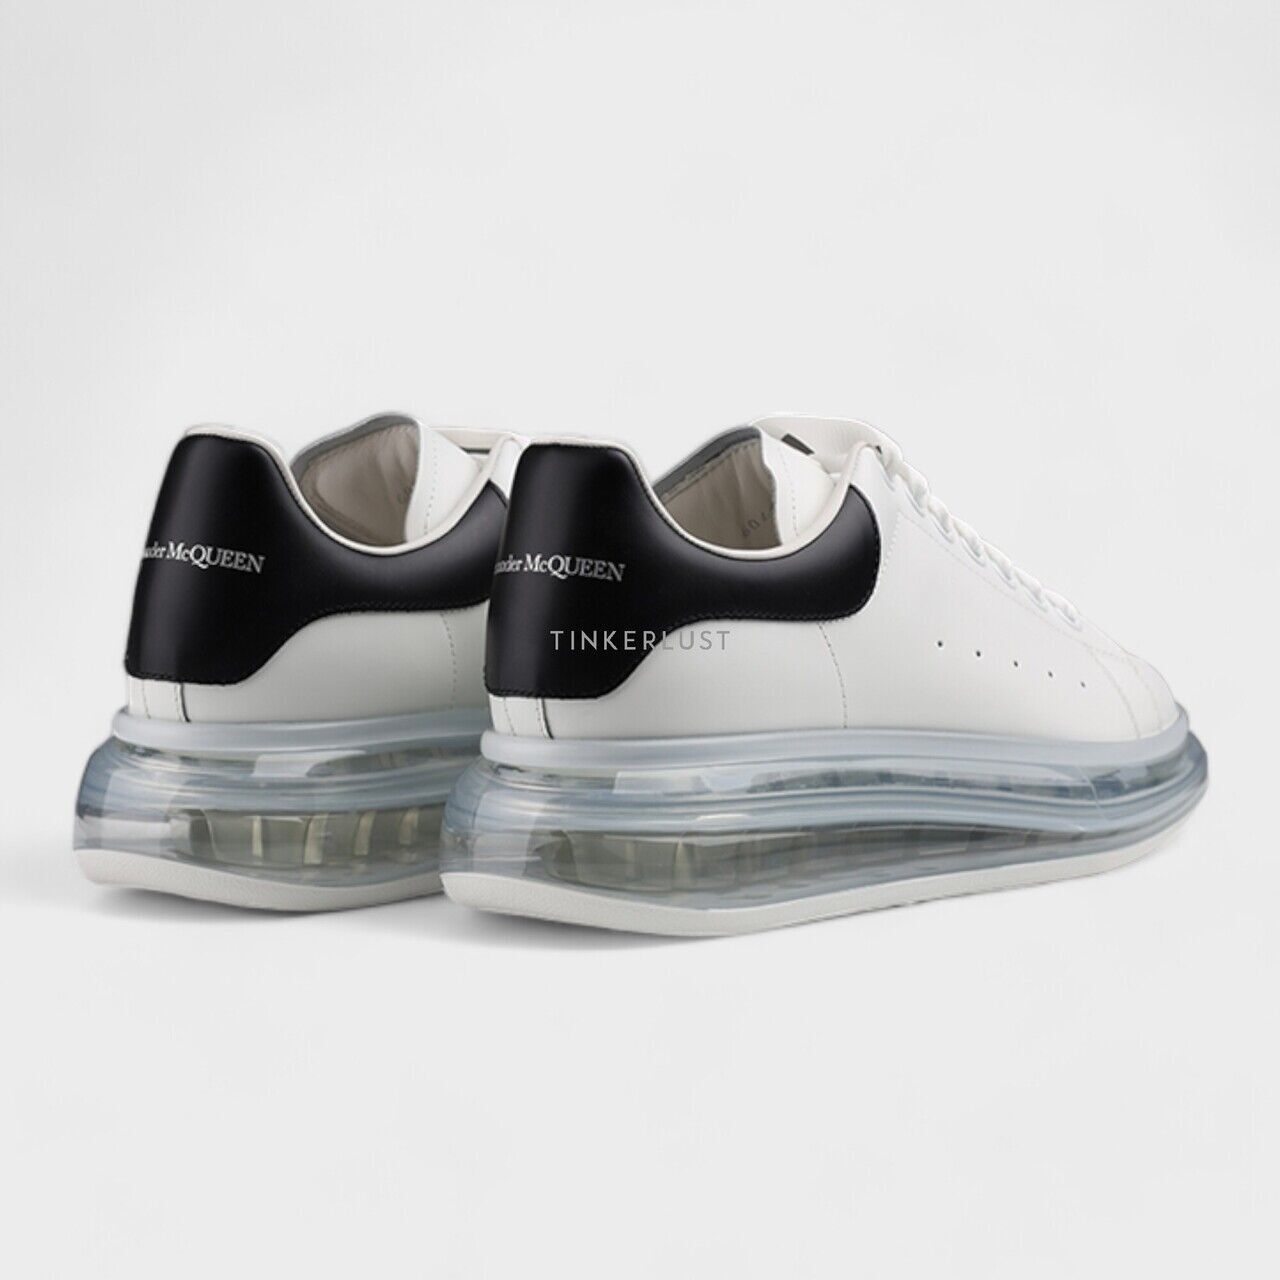 Alexander McQueen Men Transparent Oversized Lace-Up Sneakers in White/Black Smooth Leather